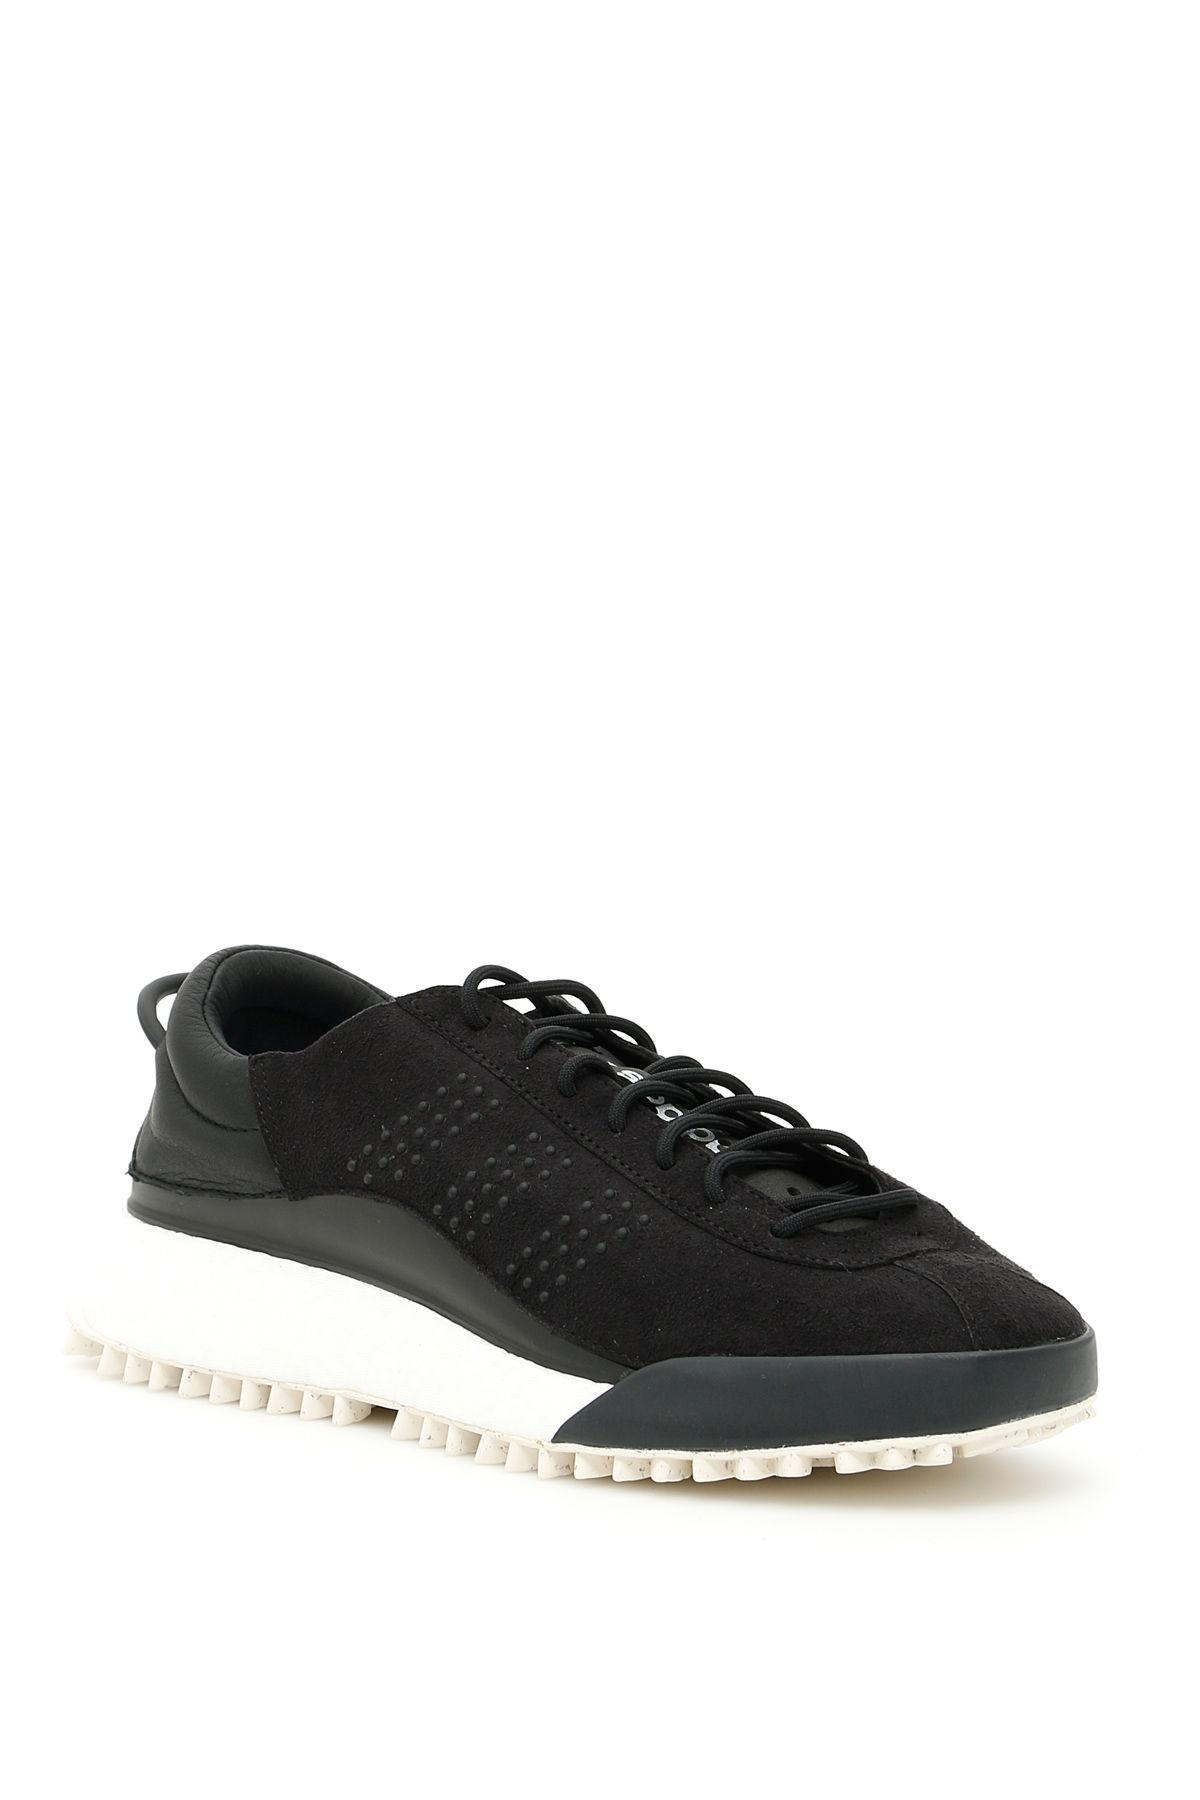 ADIDAS ORIGINALS BY ALEXANDER WANG Hike Low Top Sneakers With Leather ...